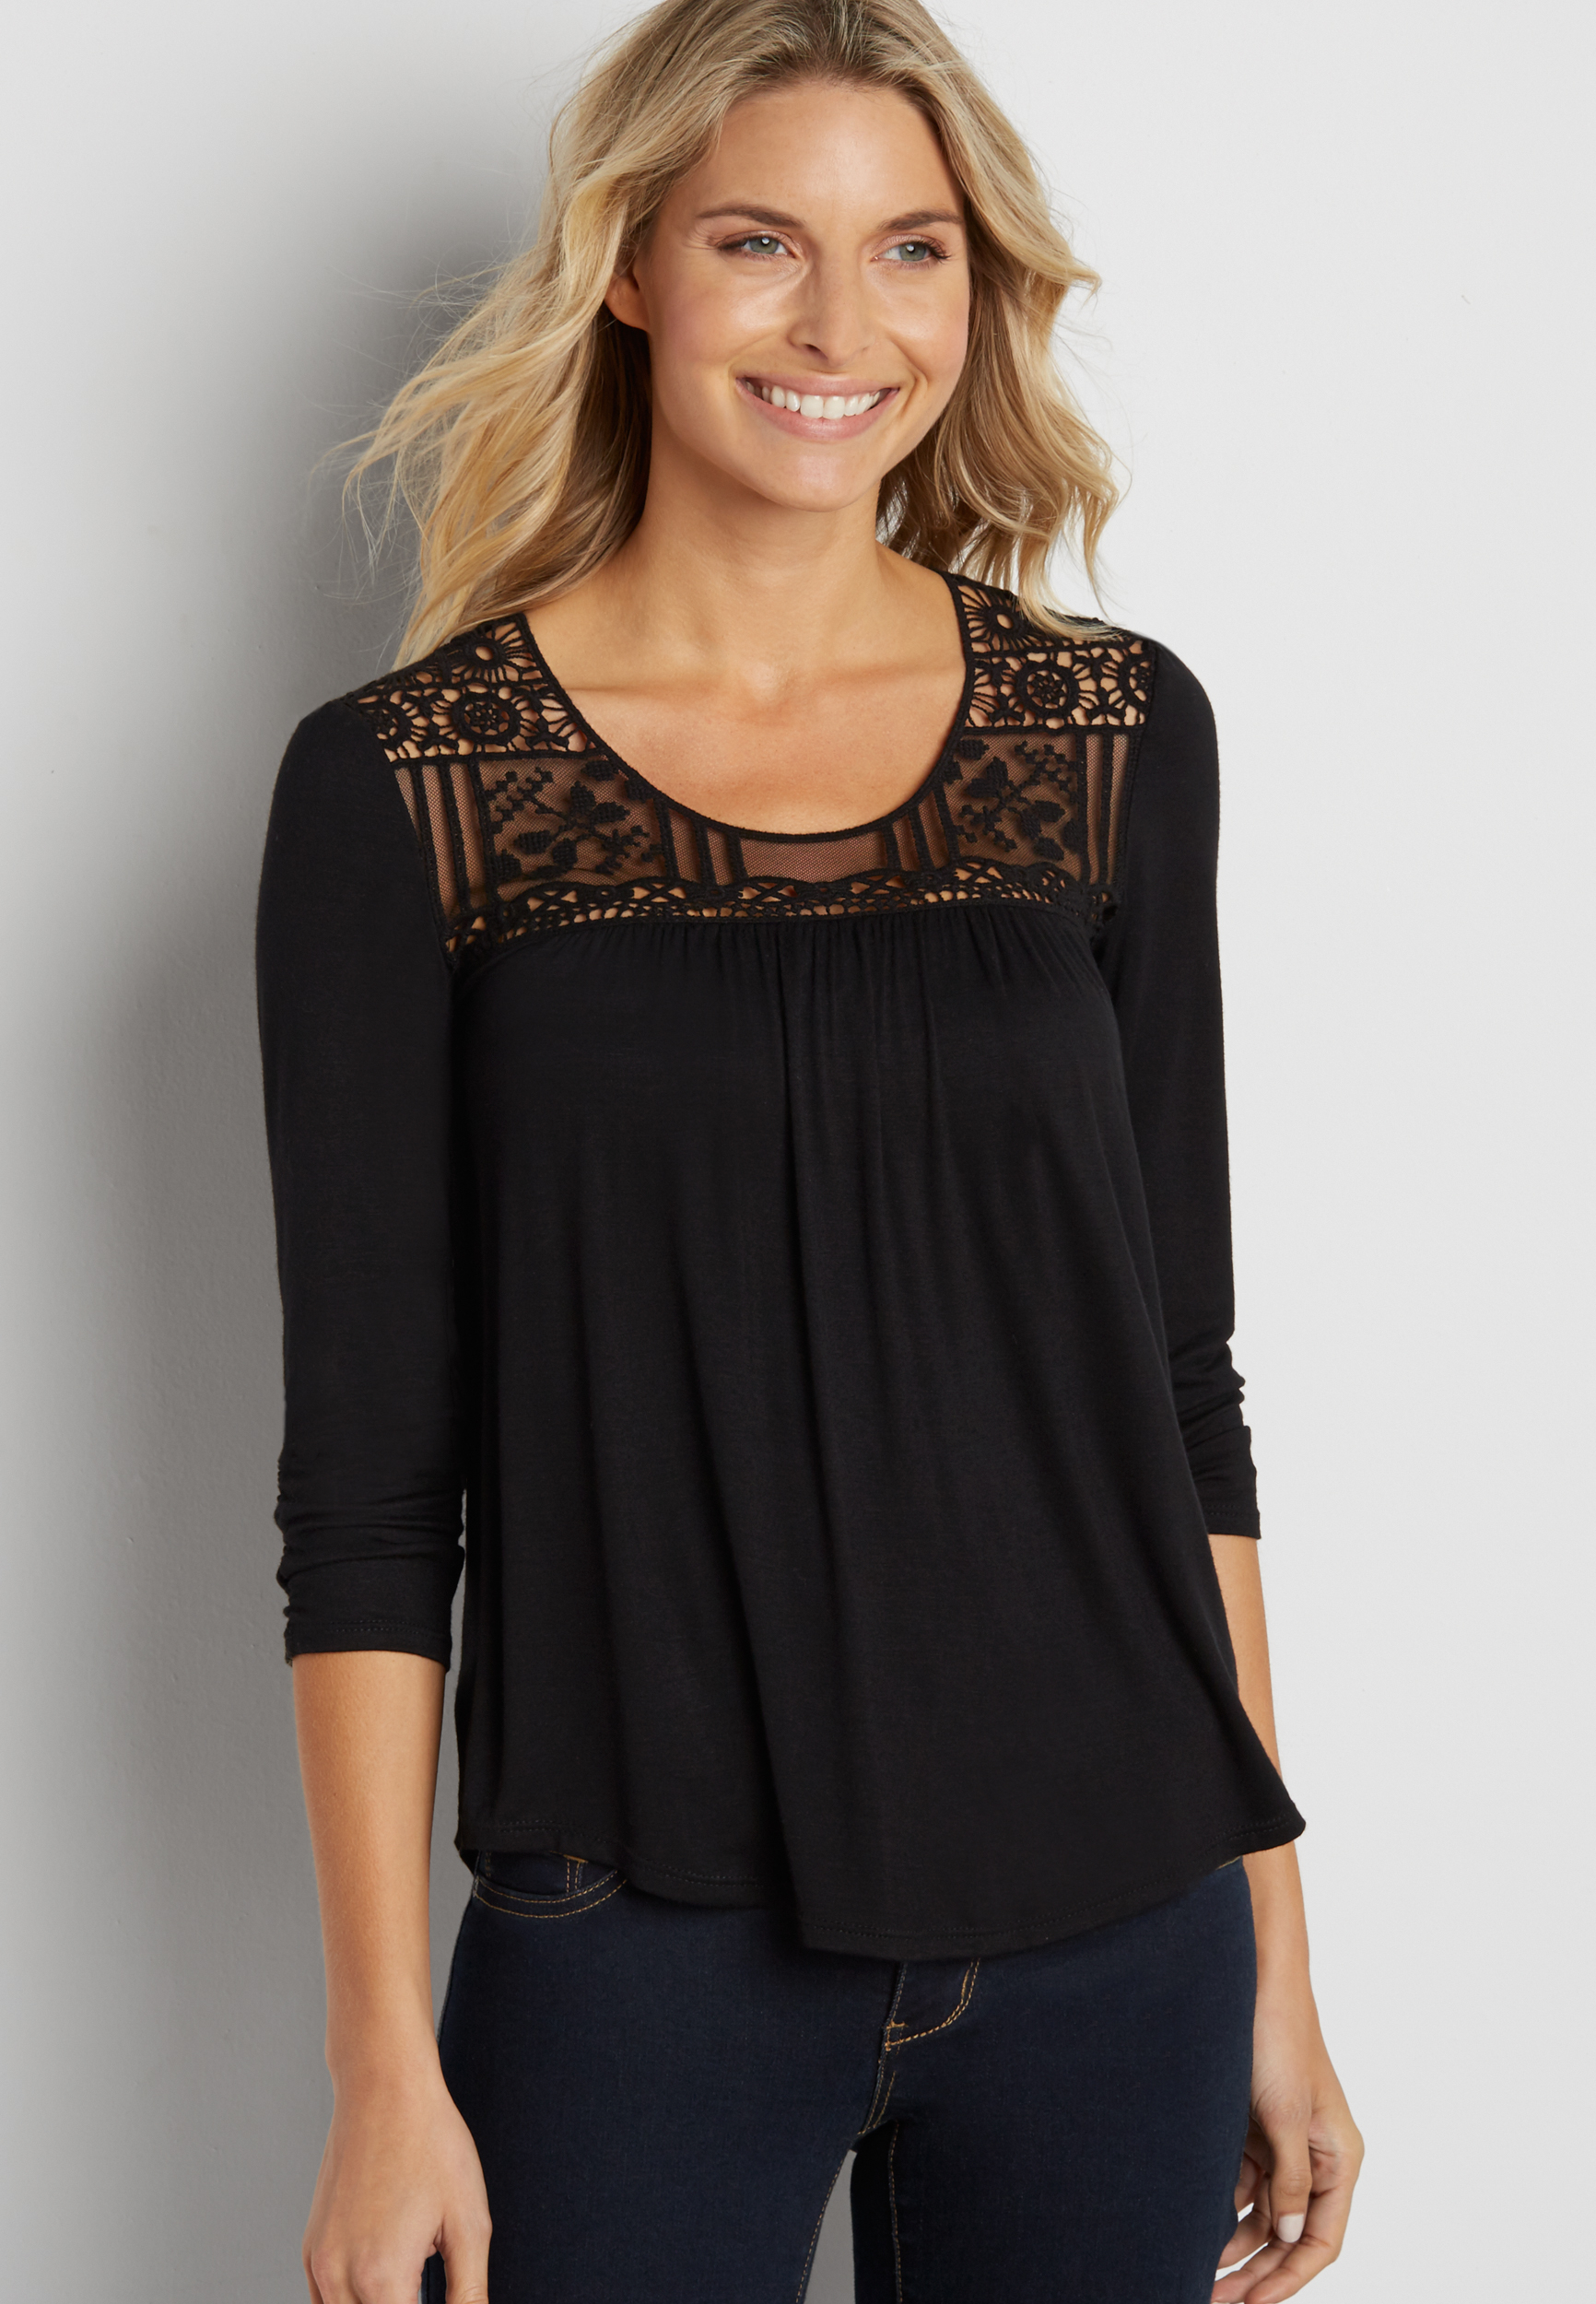 tee with crocheted yoke and button down back | maurices